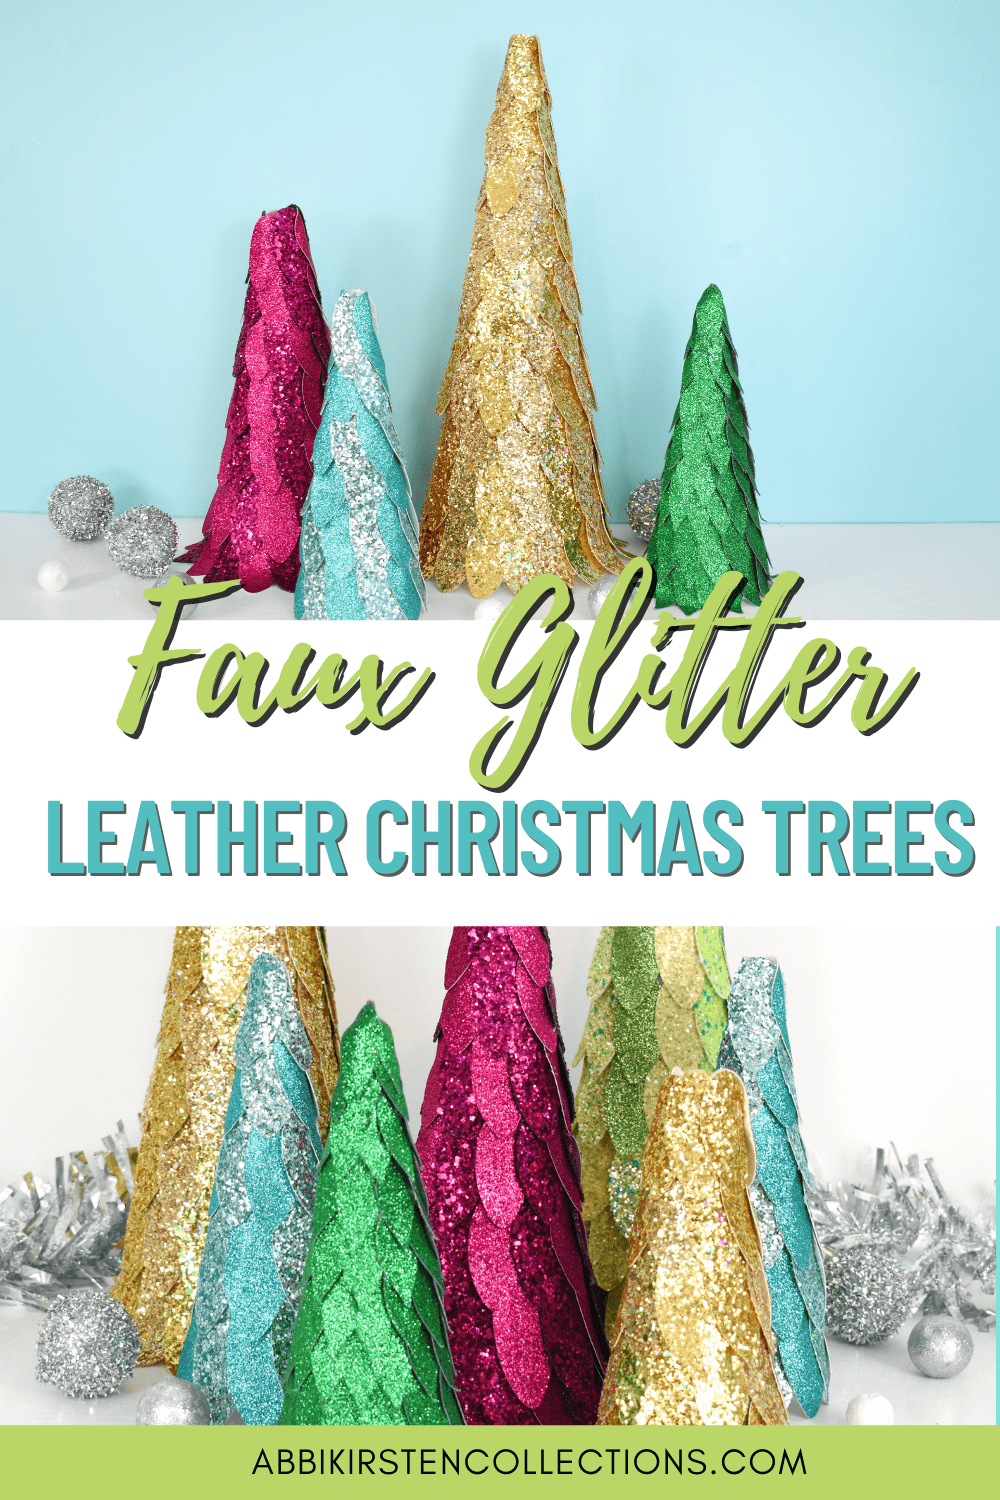 A collage of two stacked images shows a collection of DIY leather Christmas trees crafted with petals of faux glitter leather in festive gold, green, blue, silver and pink. Text in the center of the graphic reads, "Faux Glitter Leather Christmas Trees." A banner along the bottom of the photo includes Abbi's website, abbikirstencollections.com.